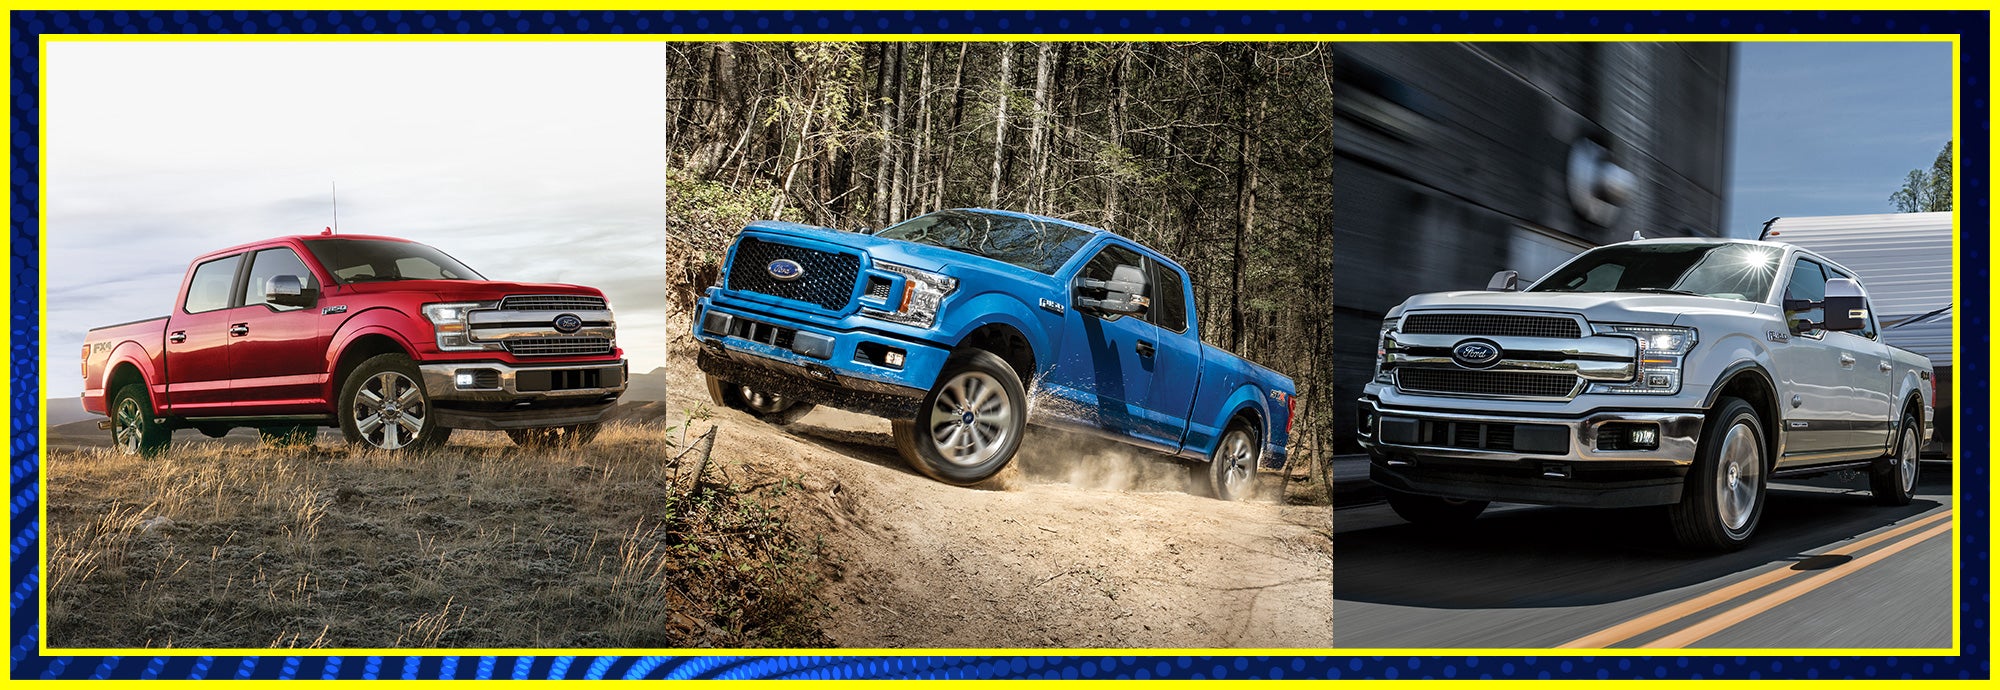 2020 Ford F-150 | Towing Capacity & More | Palmetto Ford 2020 Ford F 150 Towing Capacity 5.0 V8